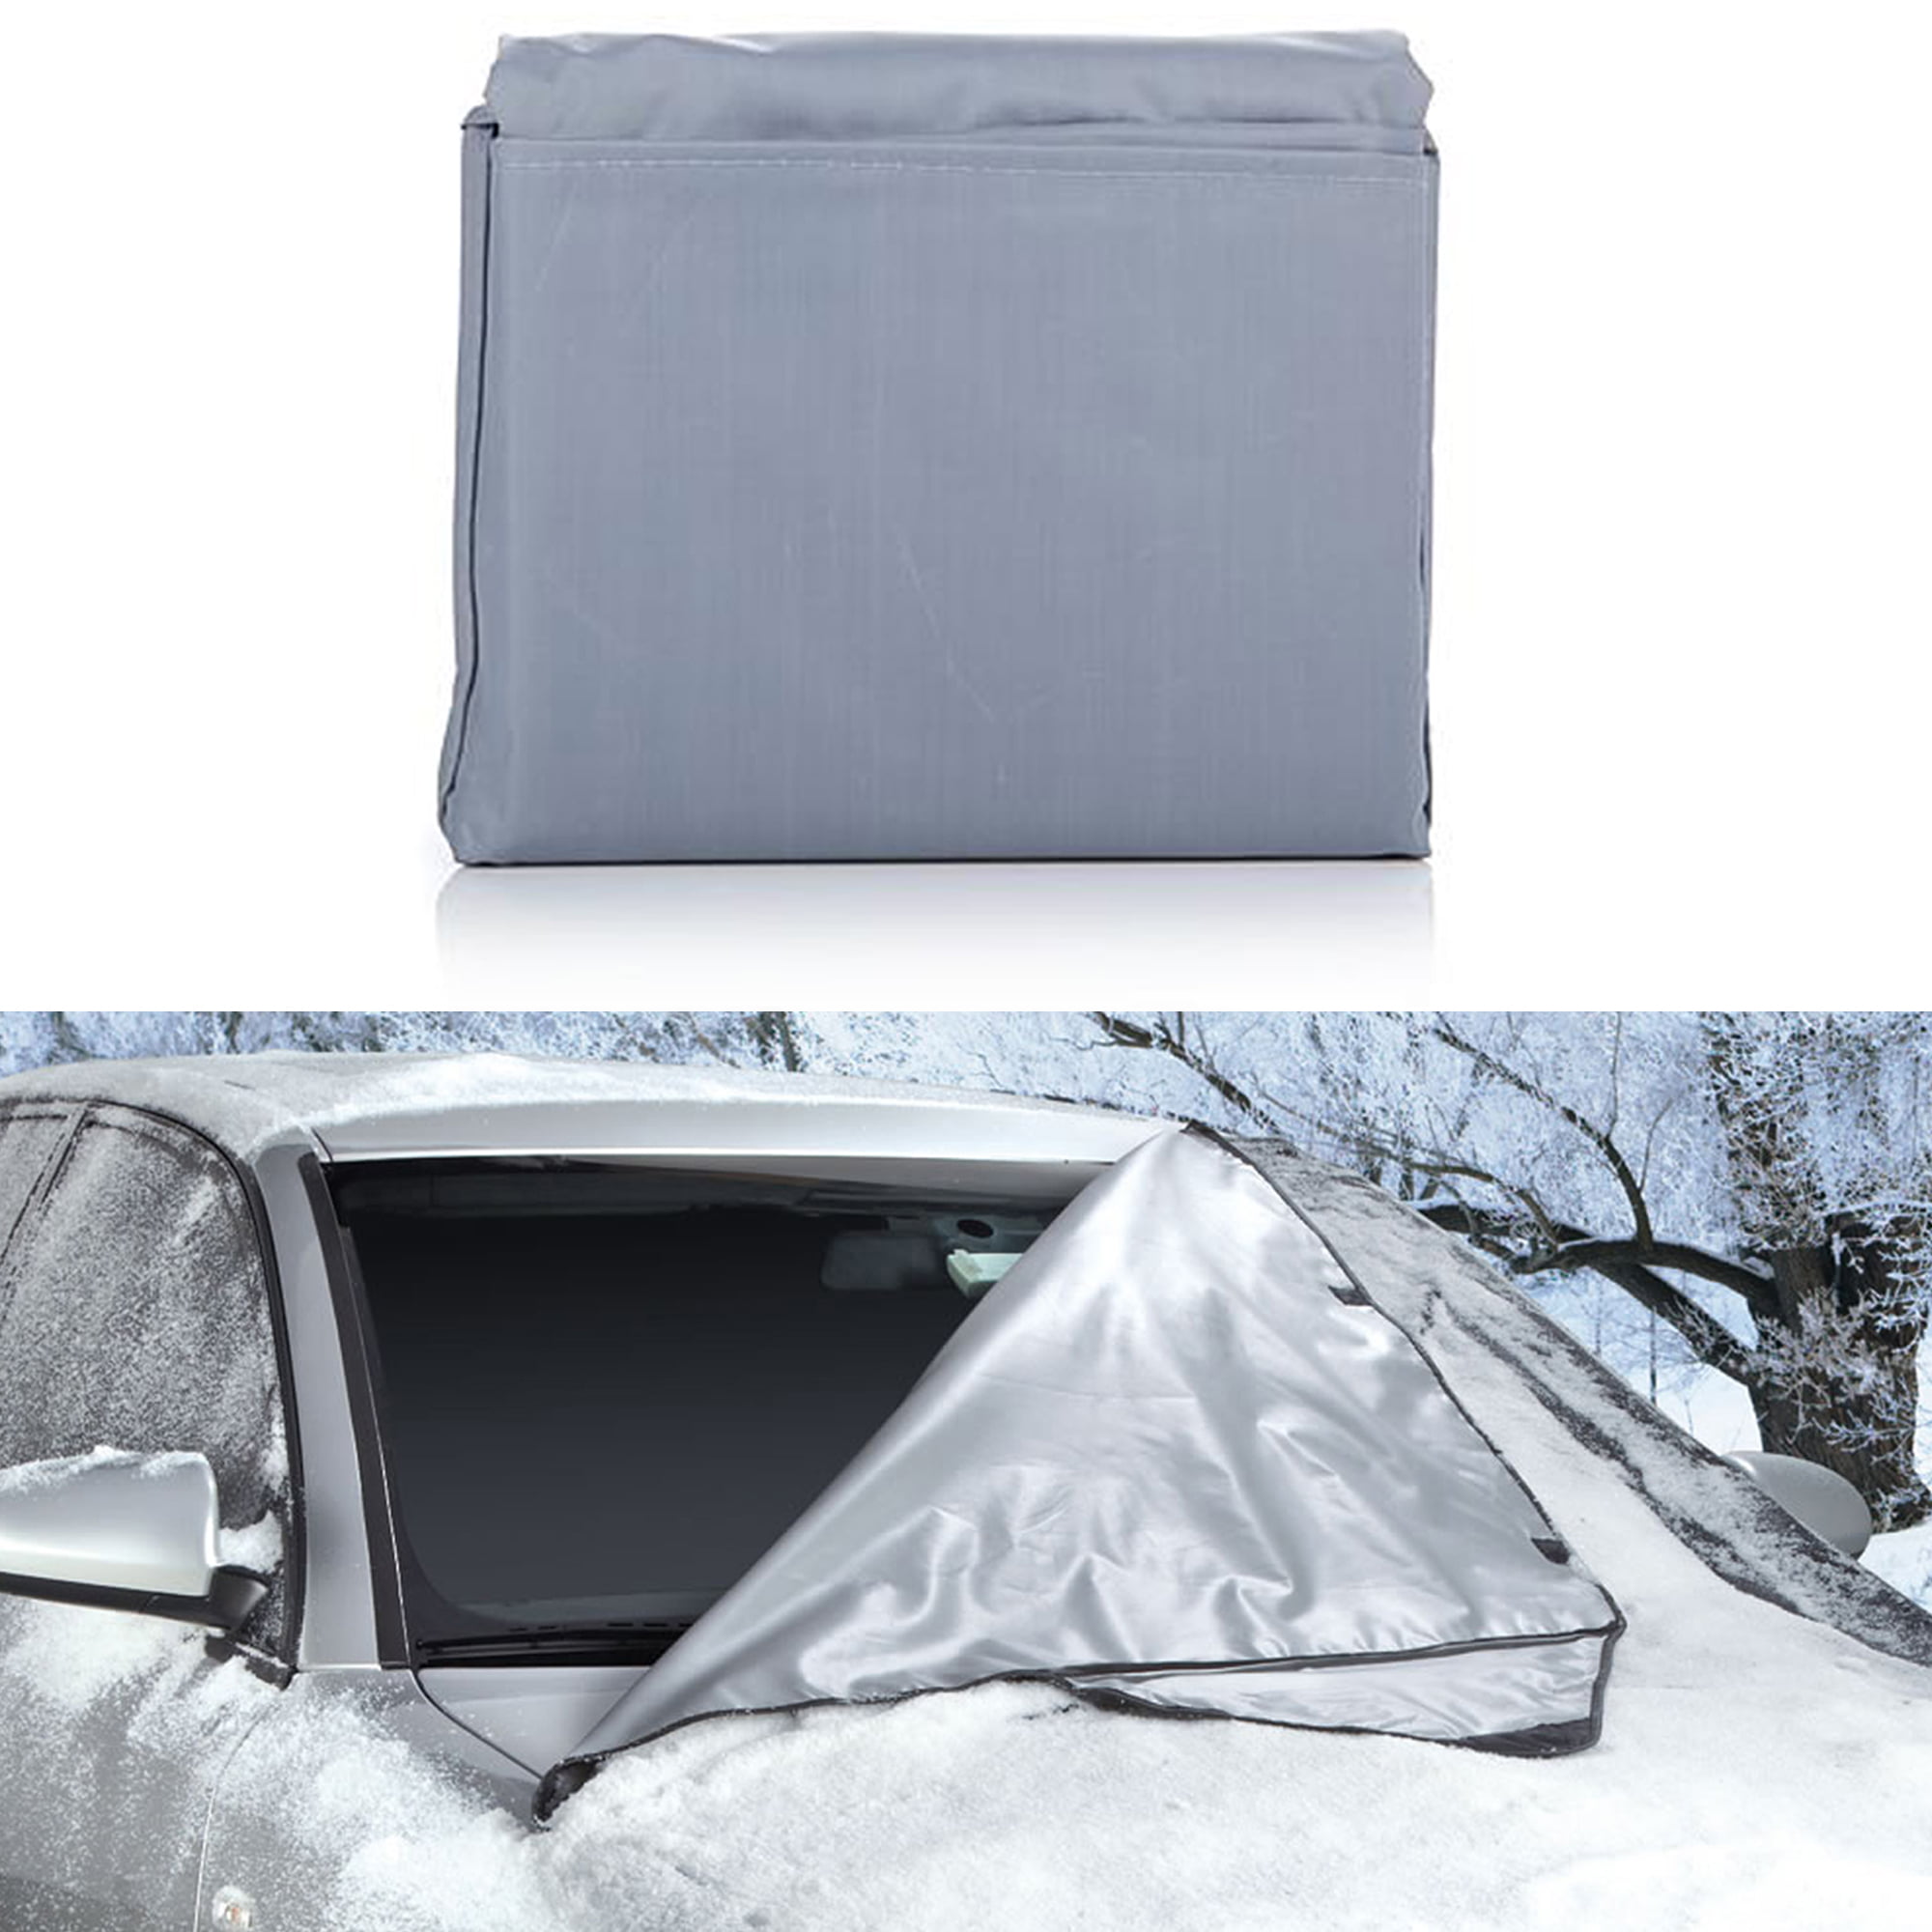 Waterproof Anti UV Weathertech Windshield Snow Cover For Opel Mokka, Corsa,  Crossland, Grandland Insignia, Astra, Hatchback Rain, Frost, Snow, And Dust  Protection From Misshui, $63.01